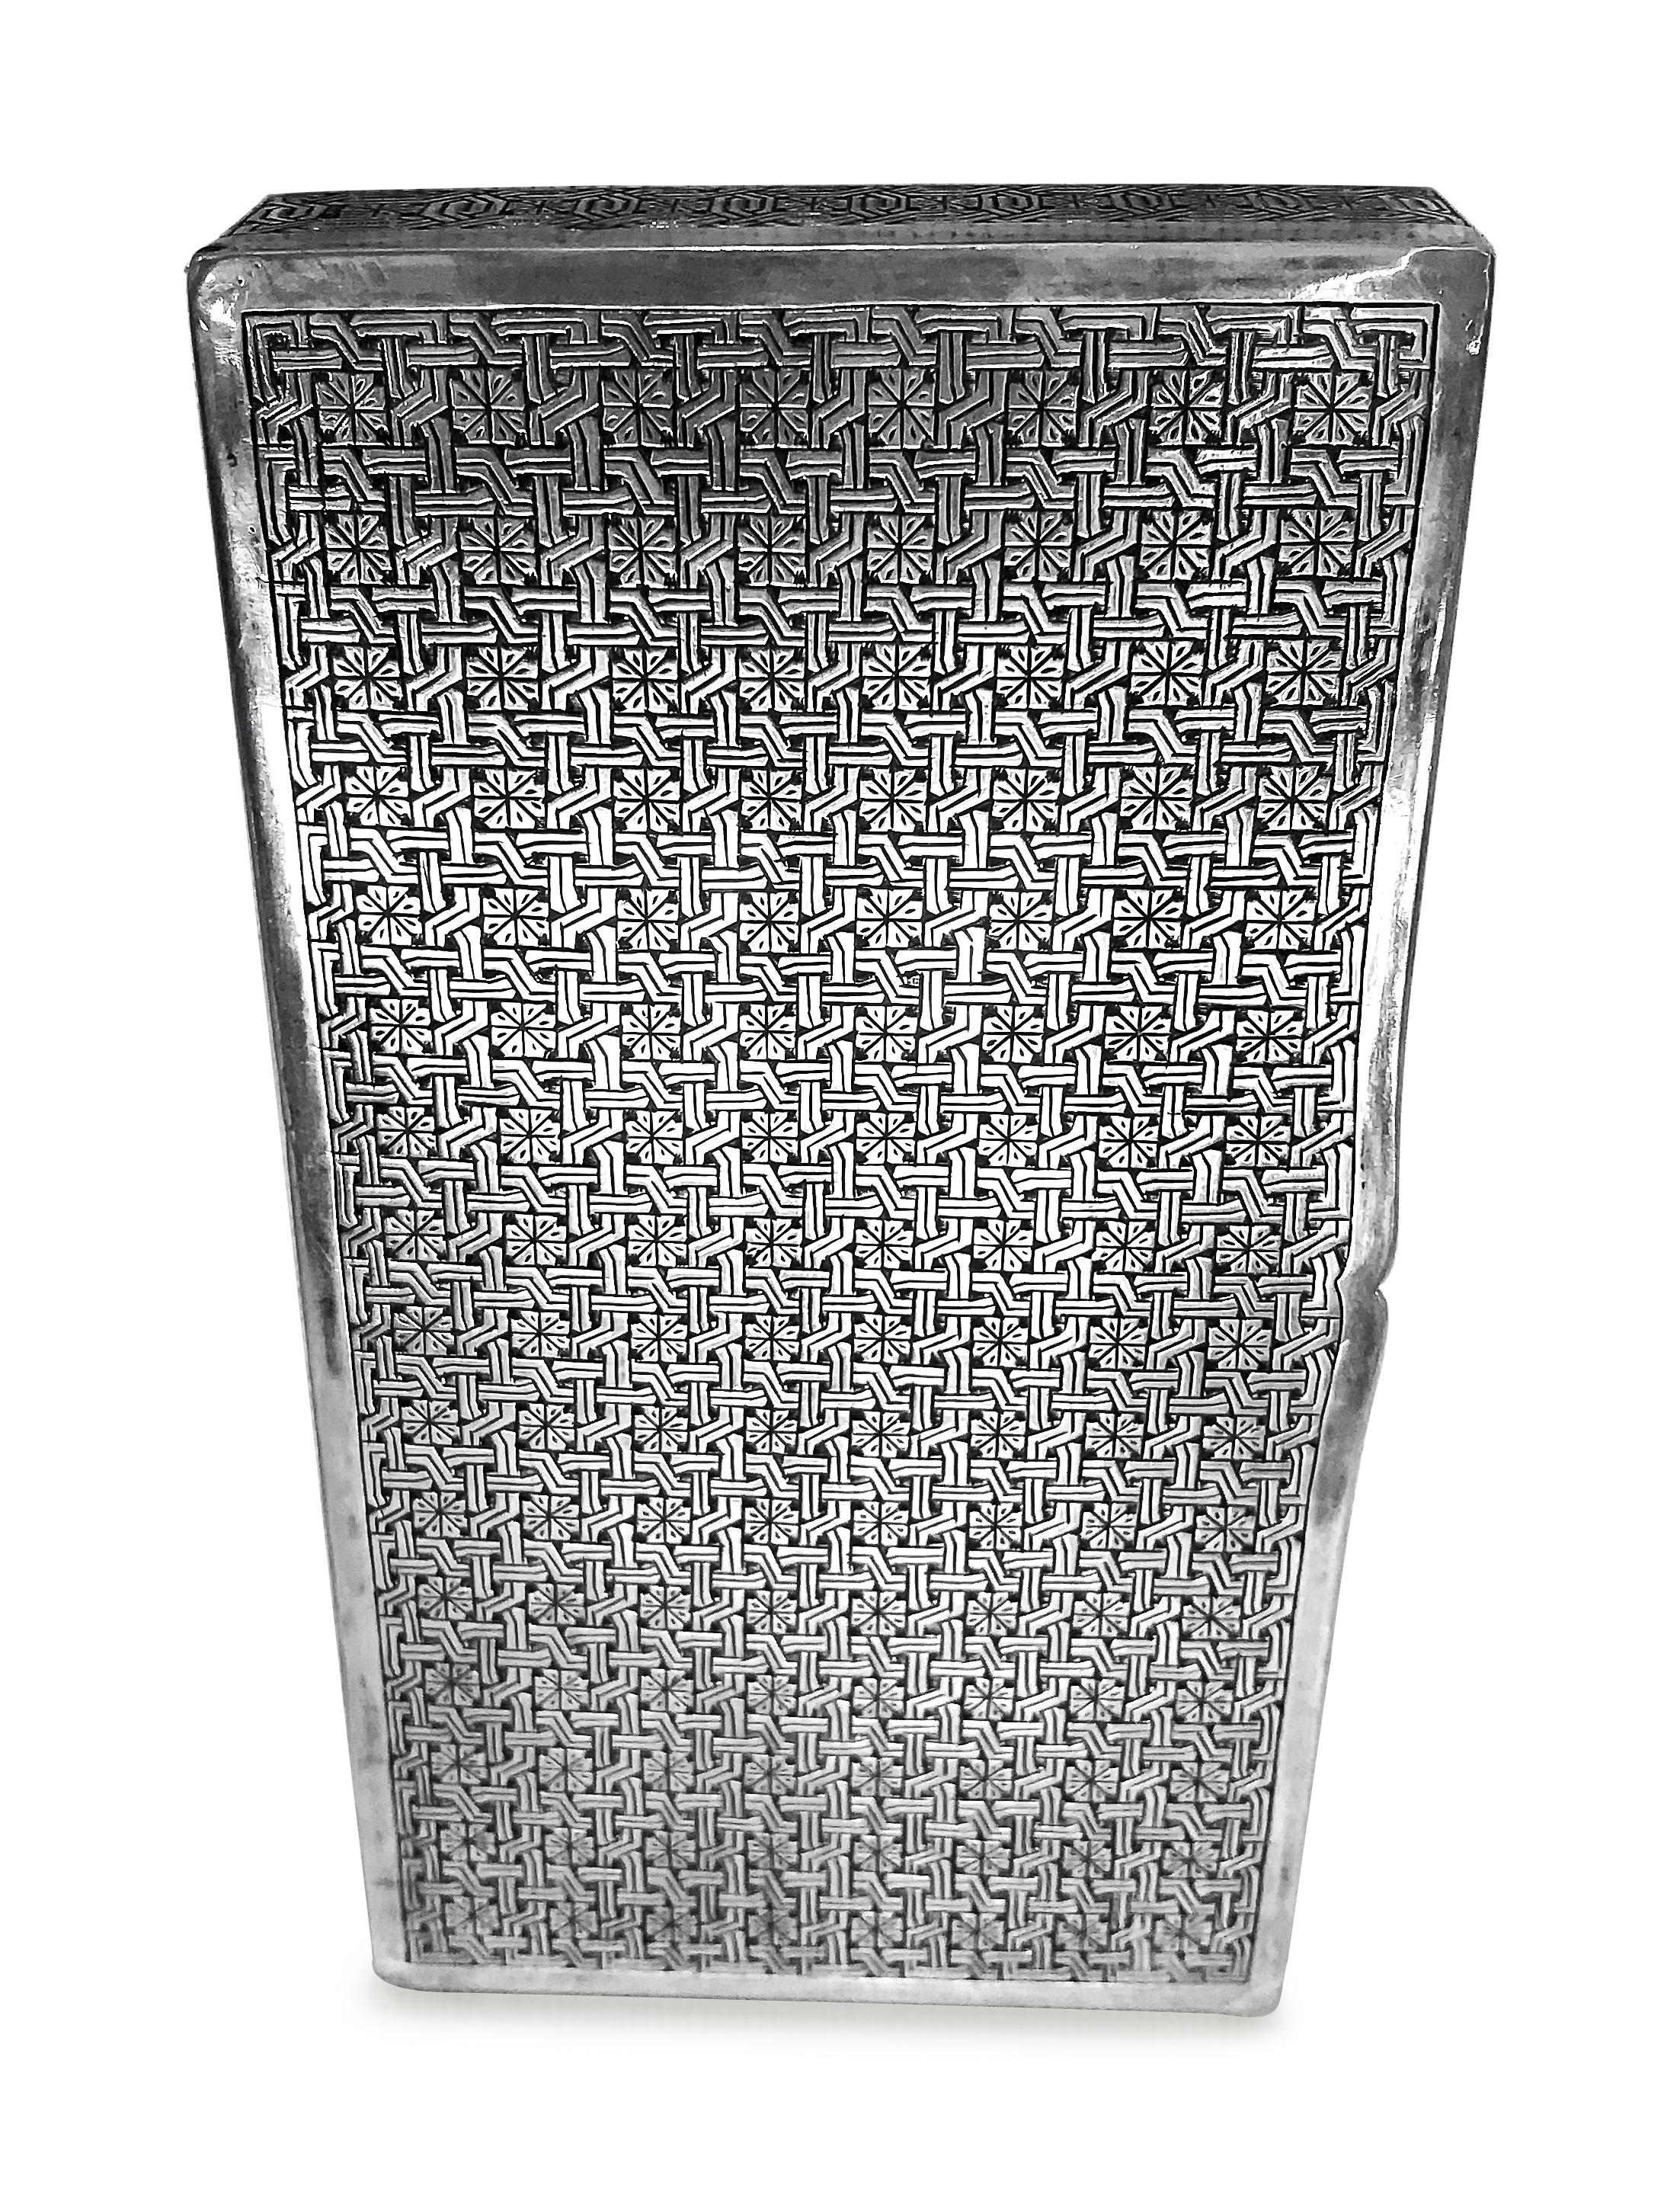 Antique  cigarette box in rectangle shape . This unique box is all hand carved and  the design is absolutely fantastic  . The design is like woven lines .the box is Persian silver 0.84 proof . 
Designer : Aghazadeh .tehran
weight :285 grams
W : 3'
L